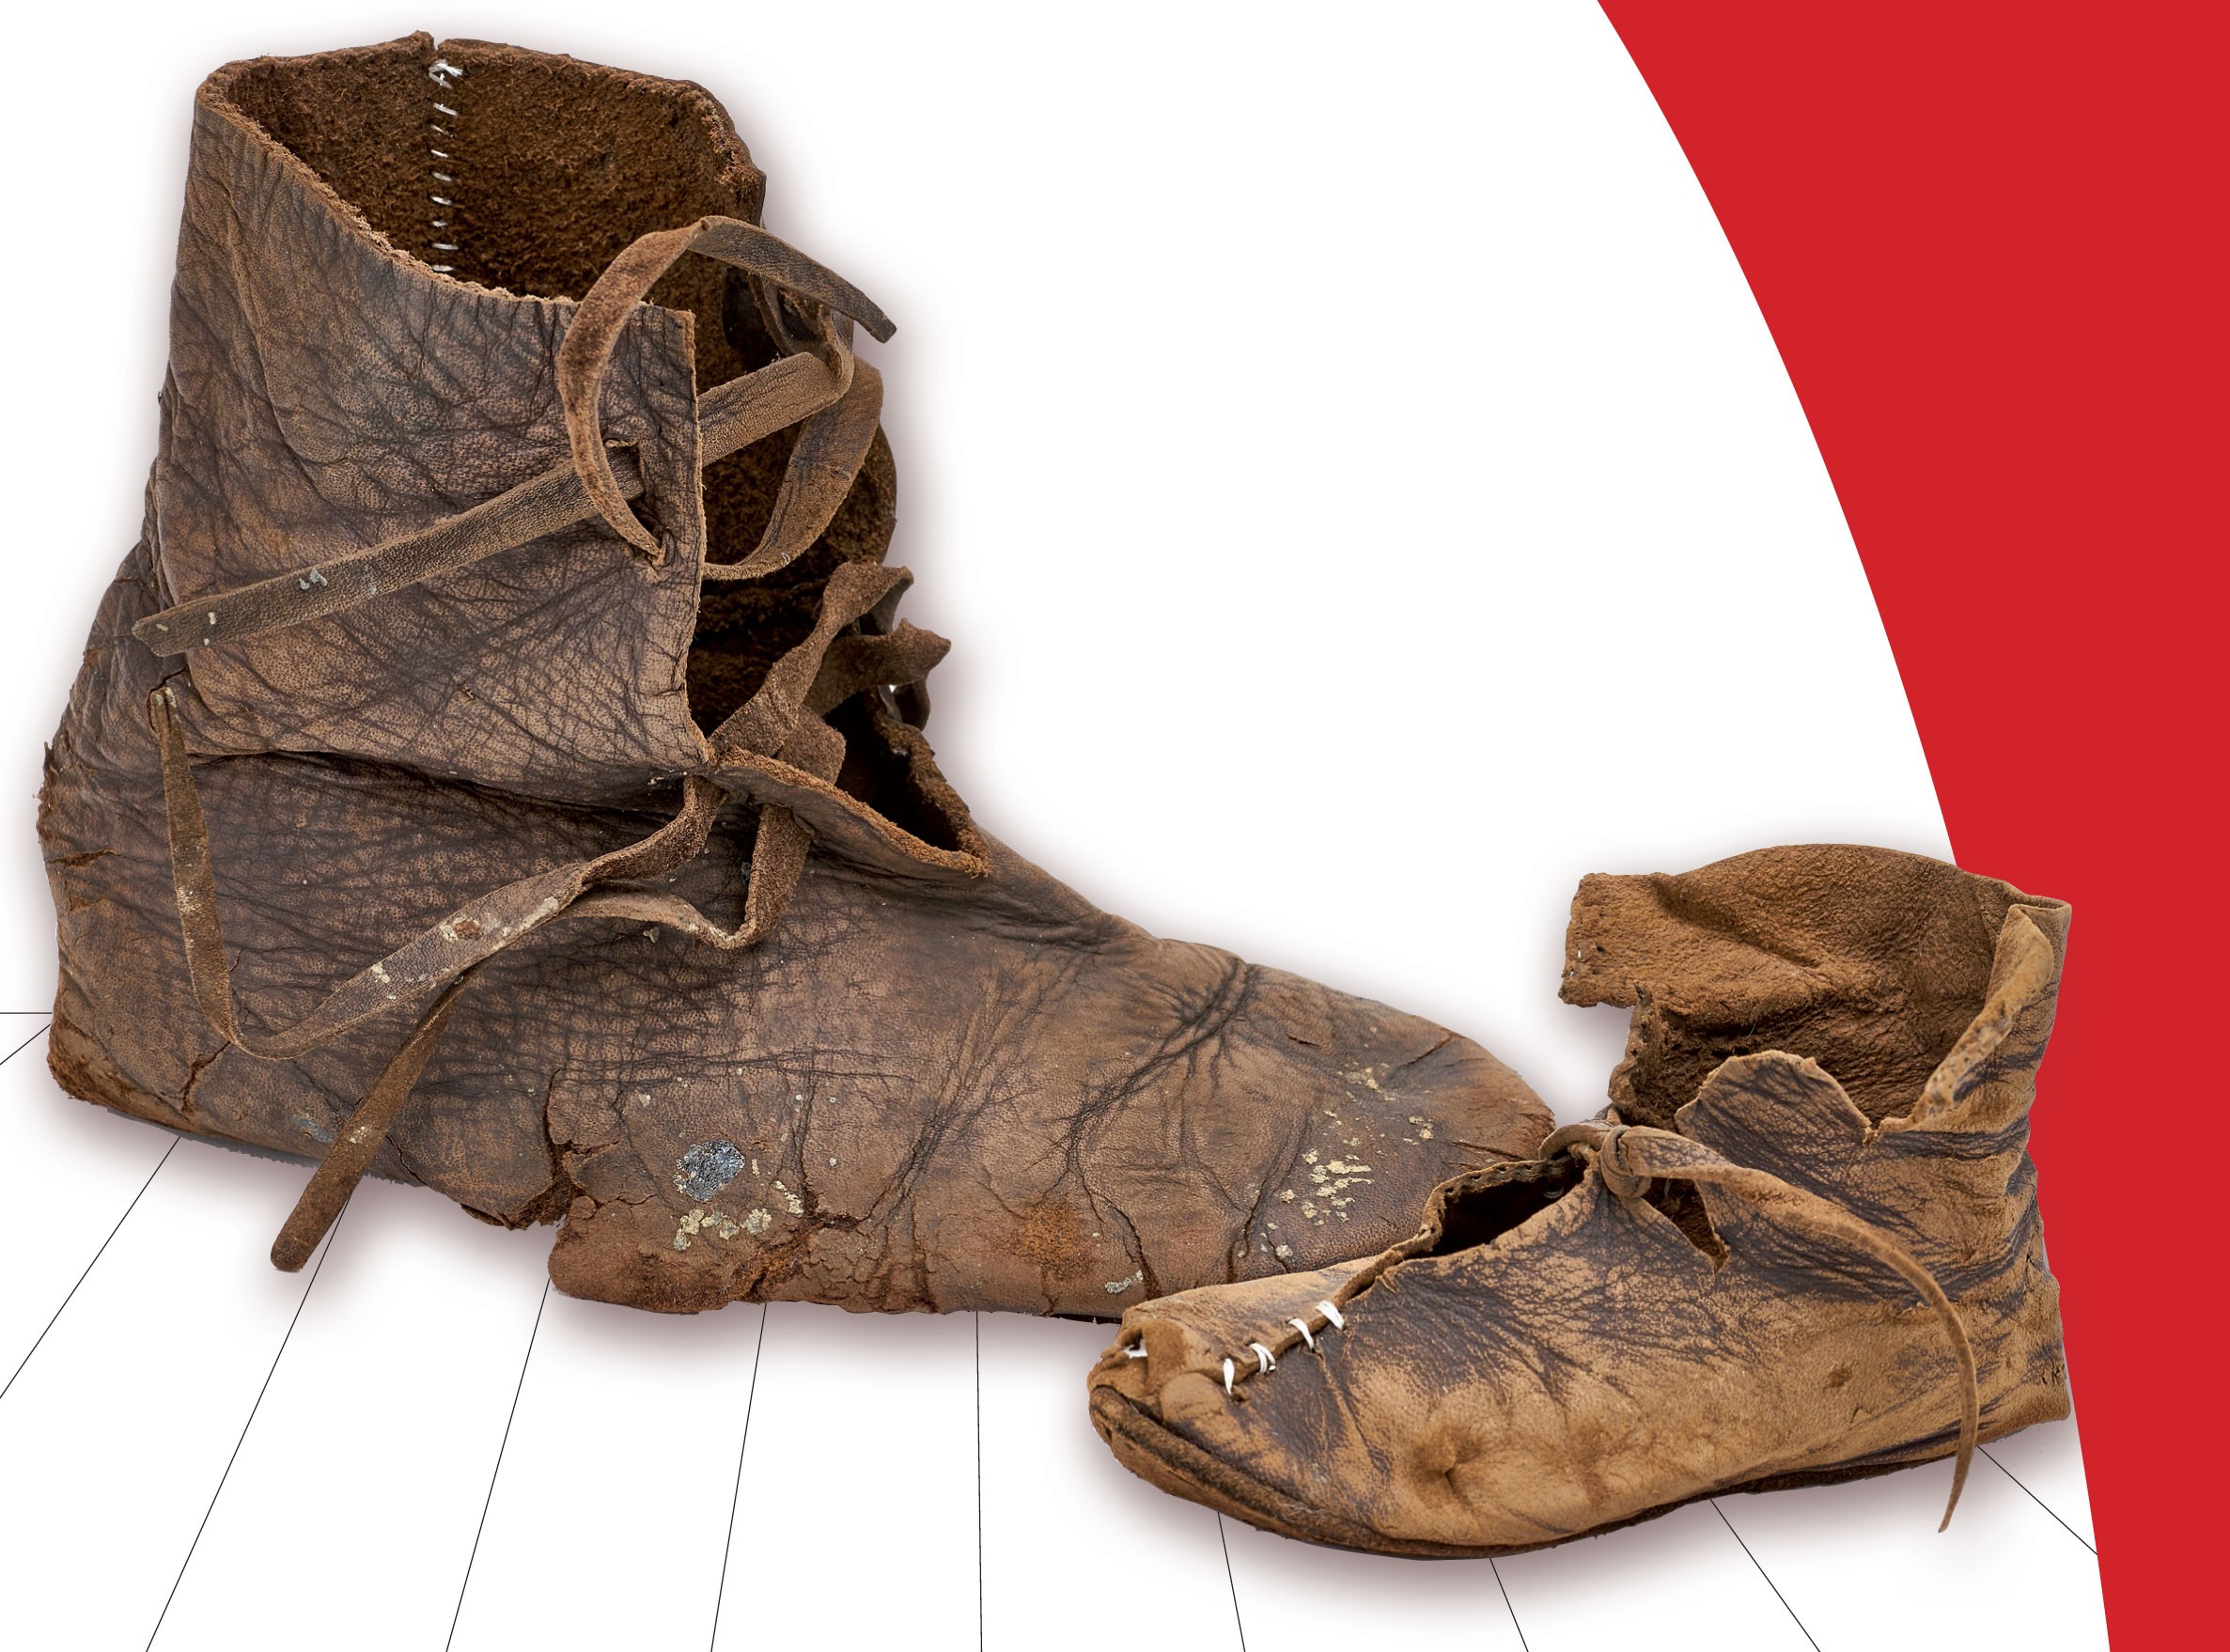 Every step leaves a mark. Historical footwear from the collection of the Archaeological Museum in Gdańsk